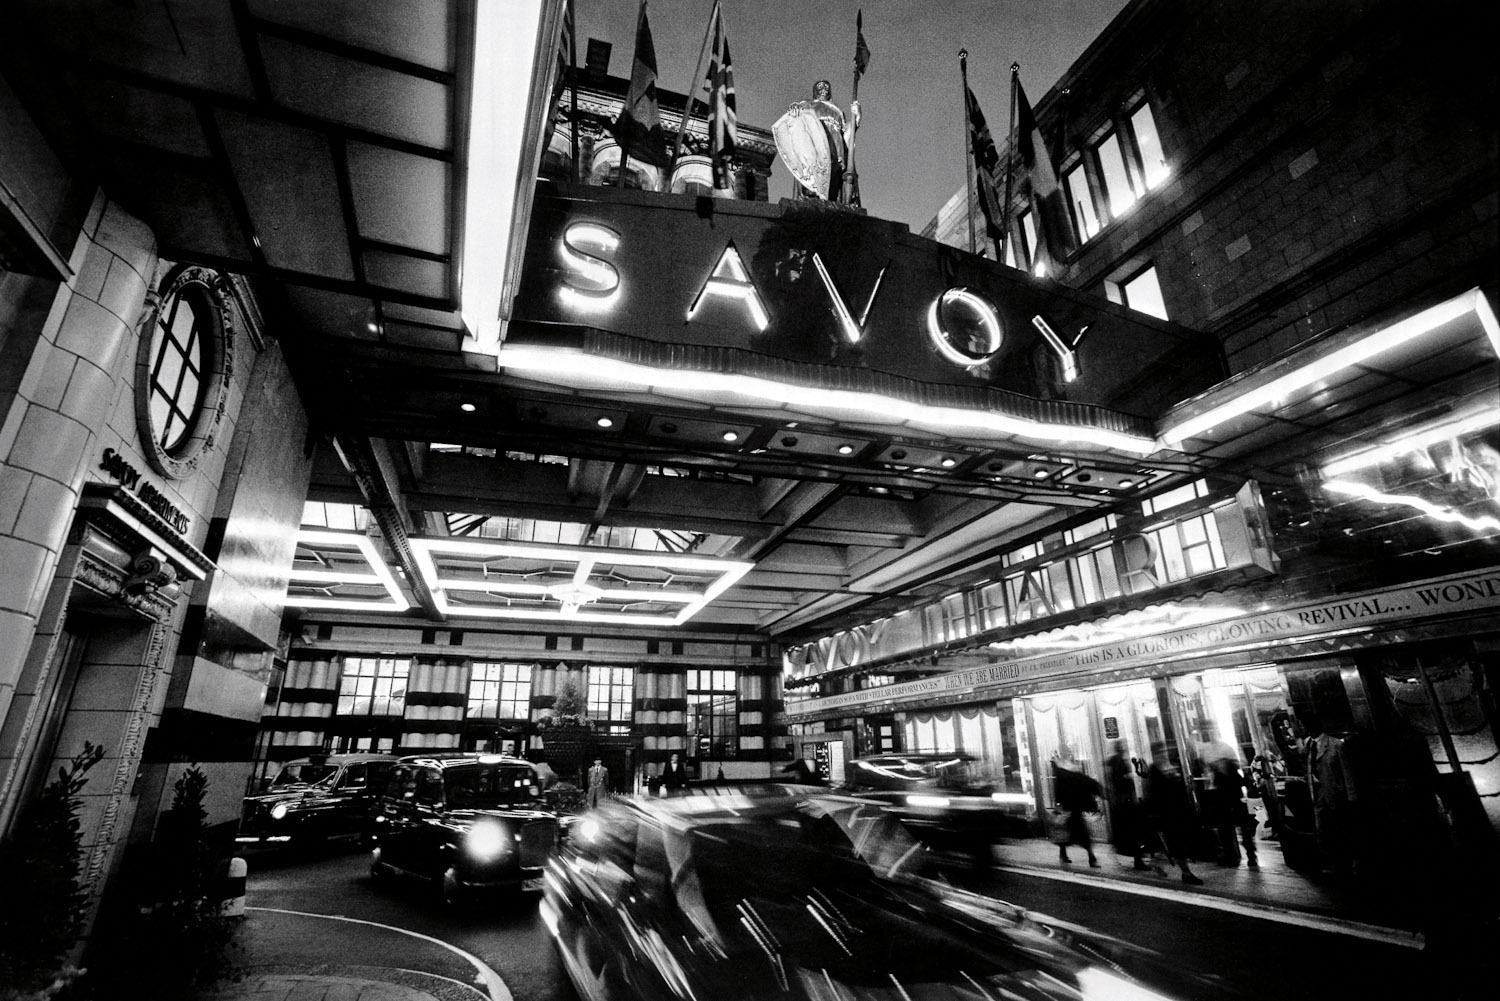 The iconic entrance to The Savoy.